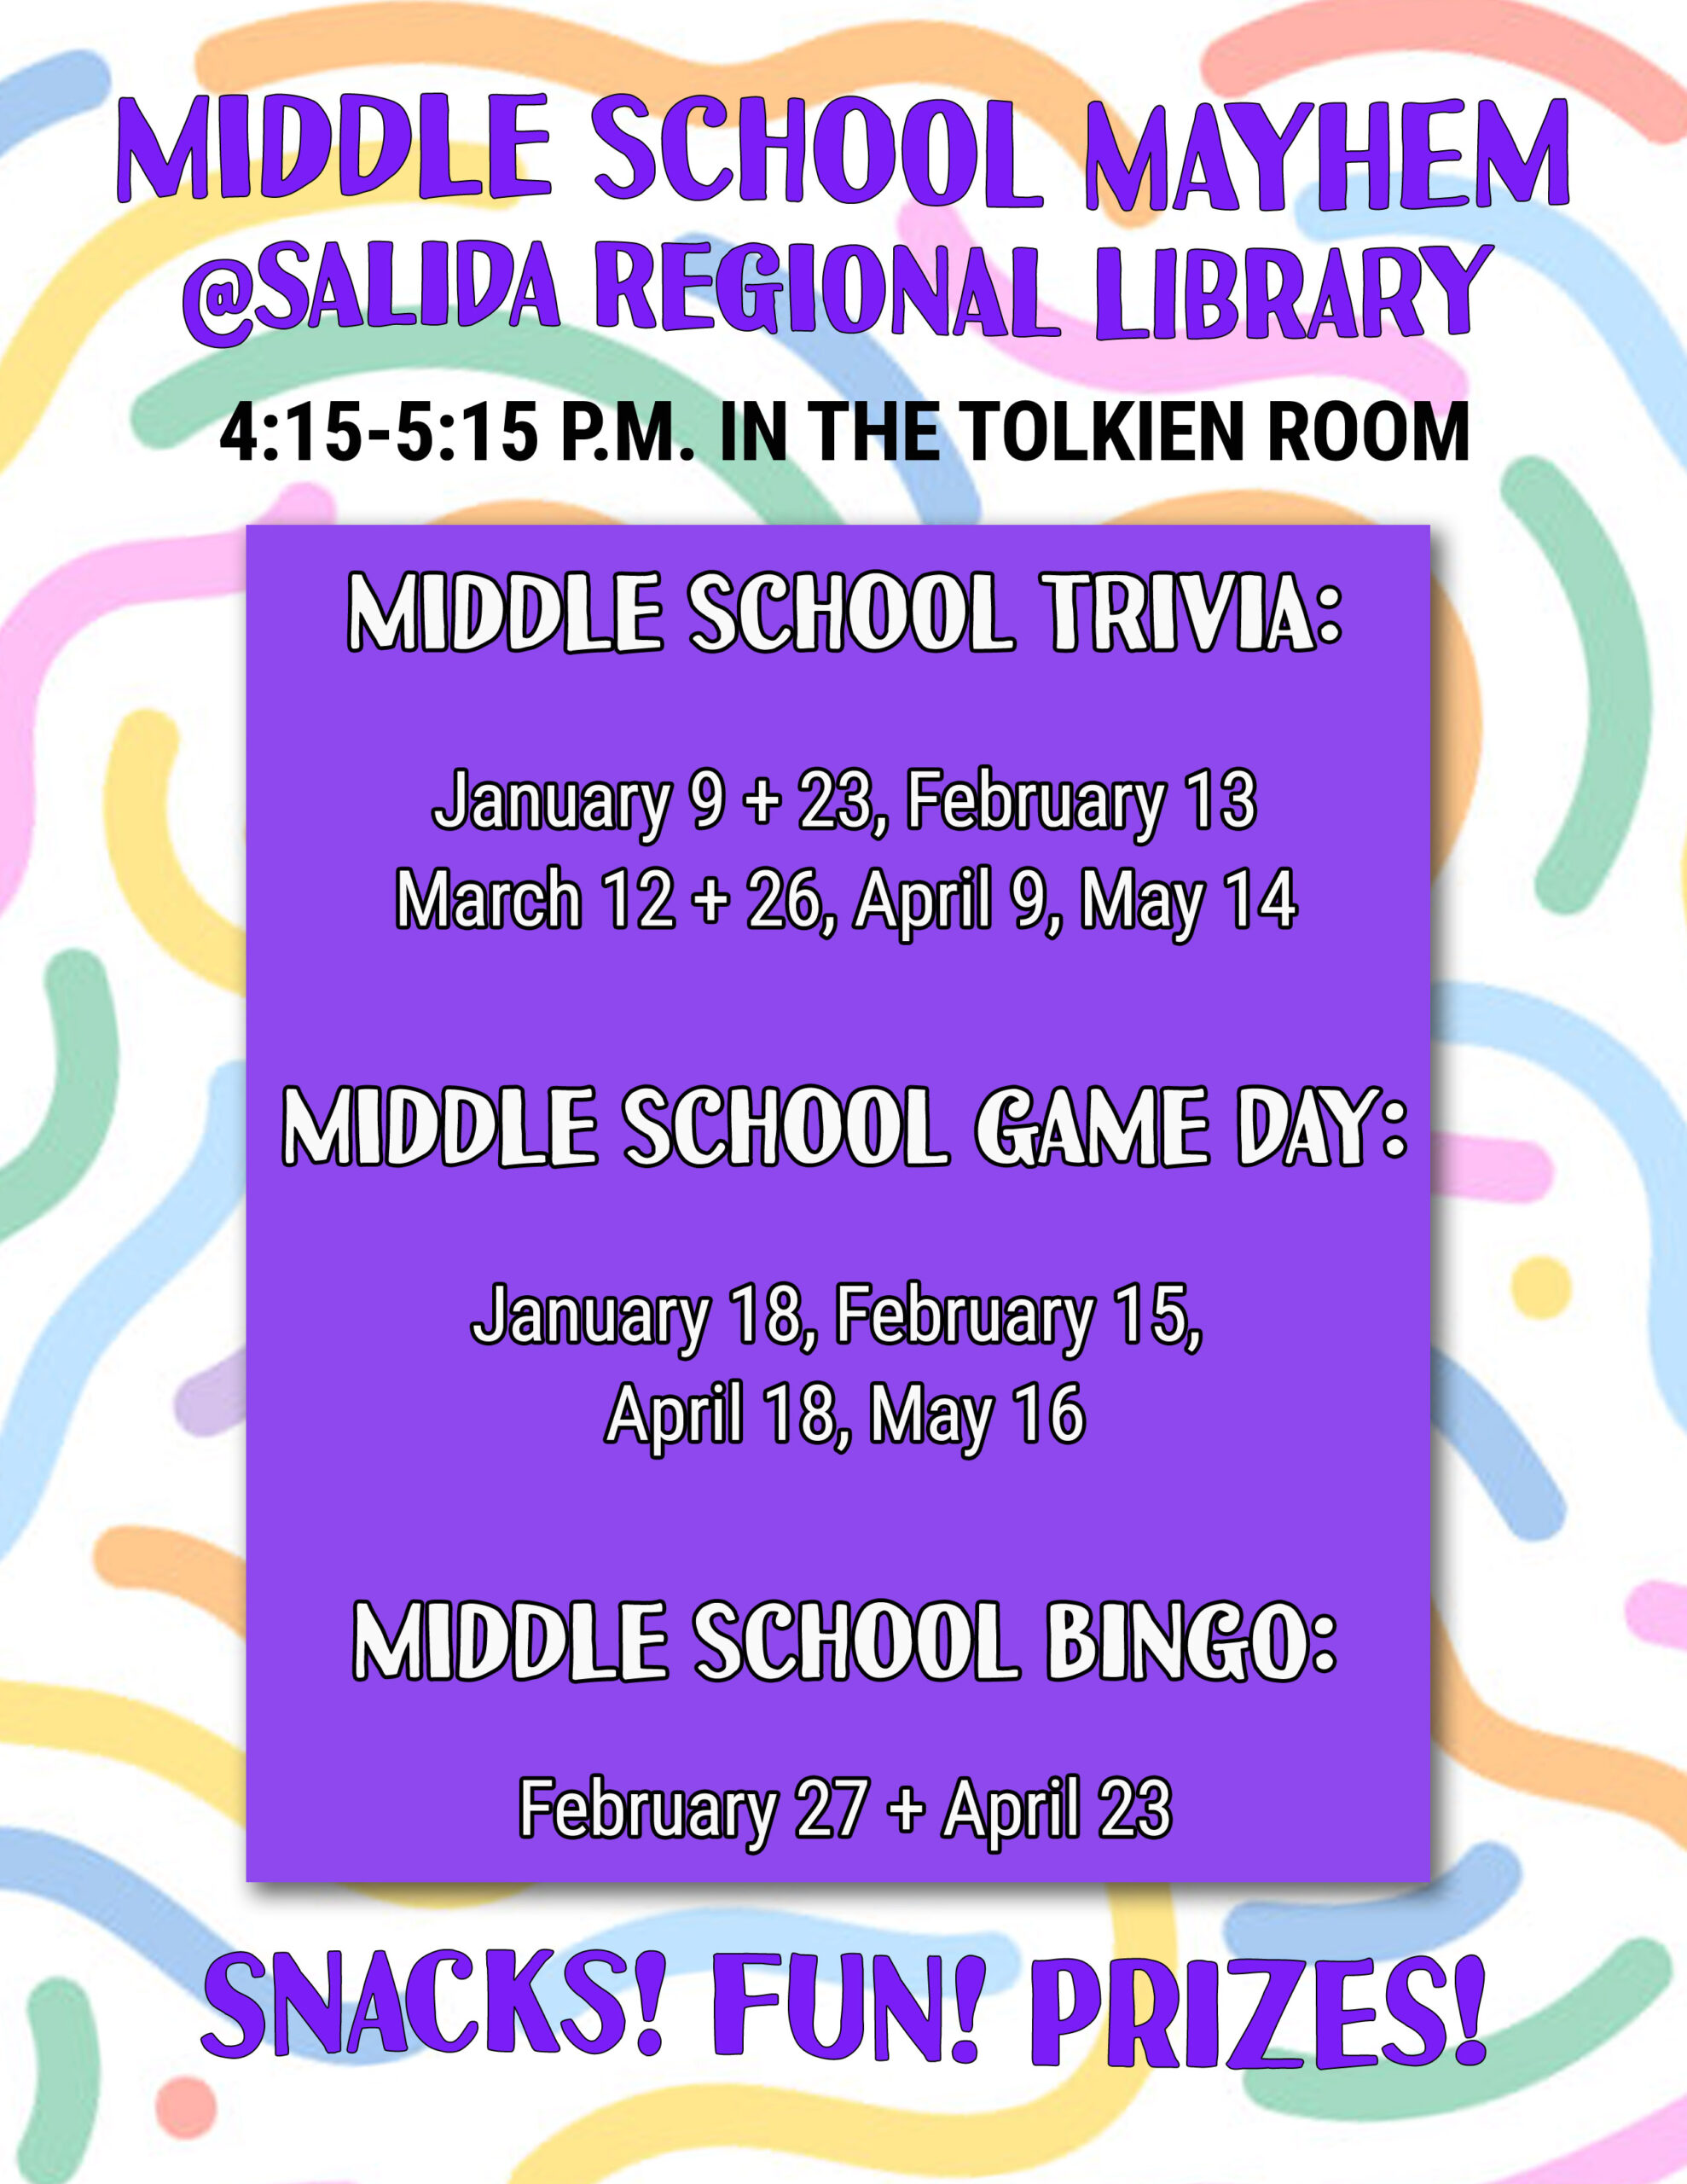 Middle School Mayhem at Salida Regional Library. 4:15 to 5:15 in the Tolkien Room. Middle School Trivia: January 9 and 23, February 13, March 12 and 26, April 9, May 14. Middle School Game Day: January 18, February 15, April 18, May 16. Middle School Bingo: February 27 and April 23. Snacks Fun Prizes!!